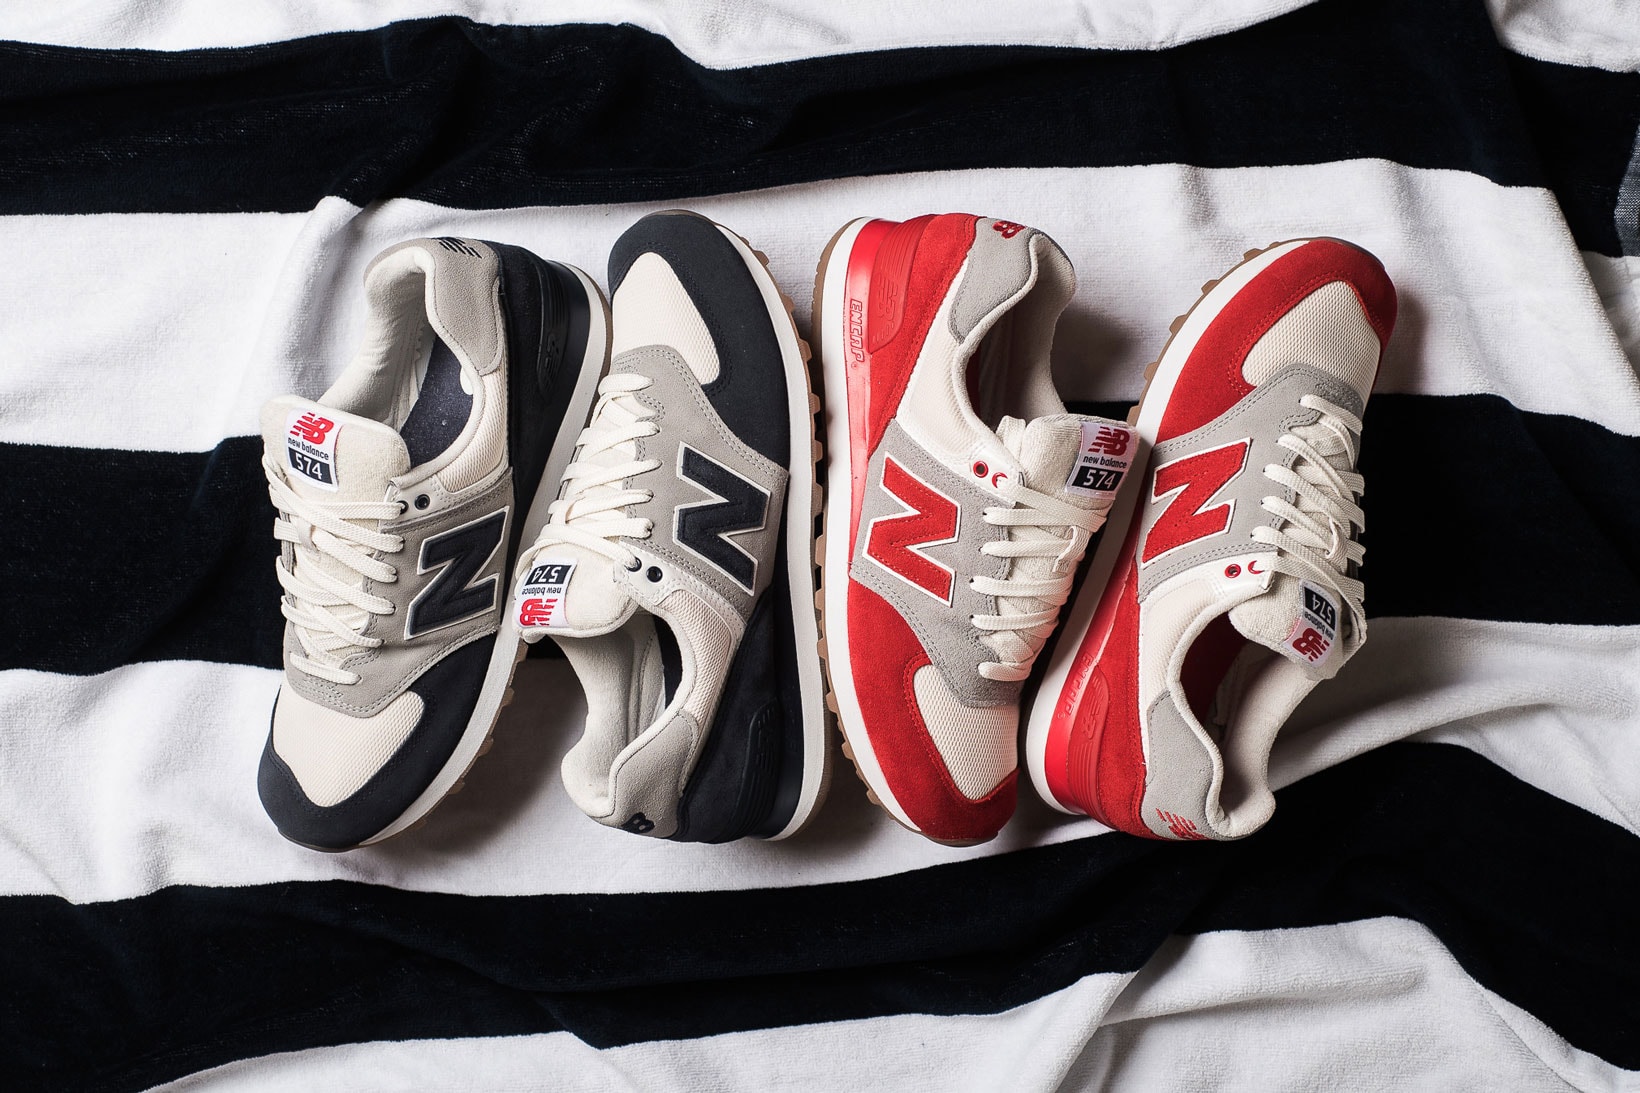 New Balance 574 Terry Cloth Pack Navy Red White Towel